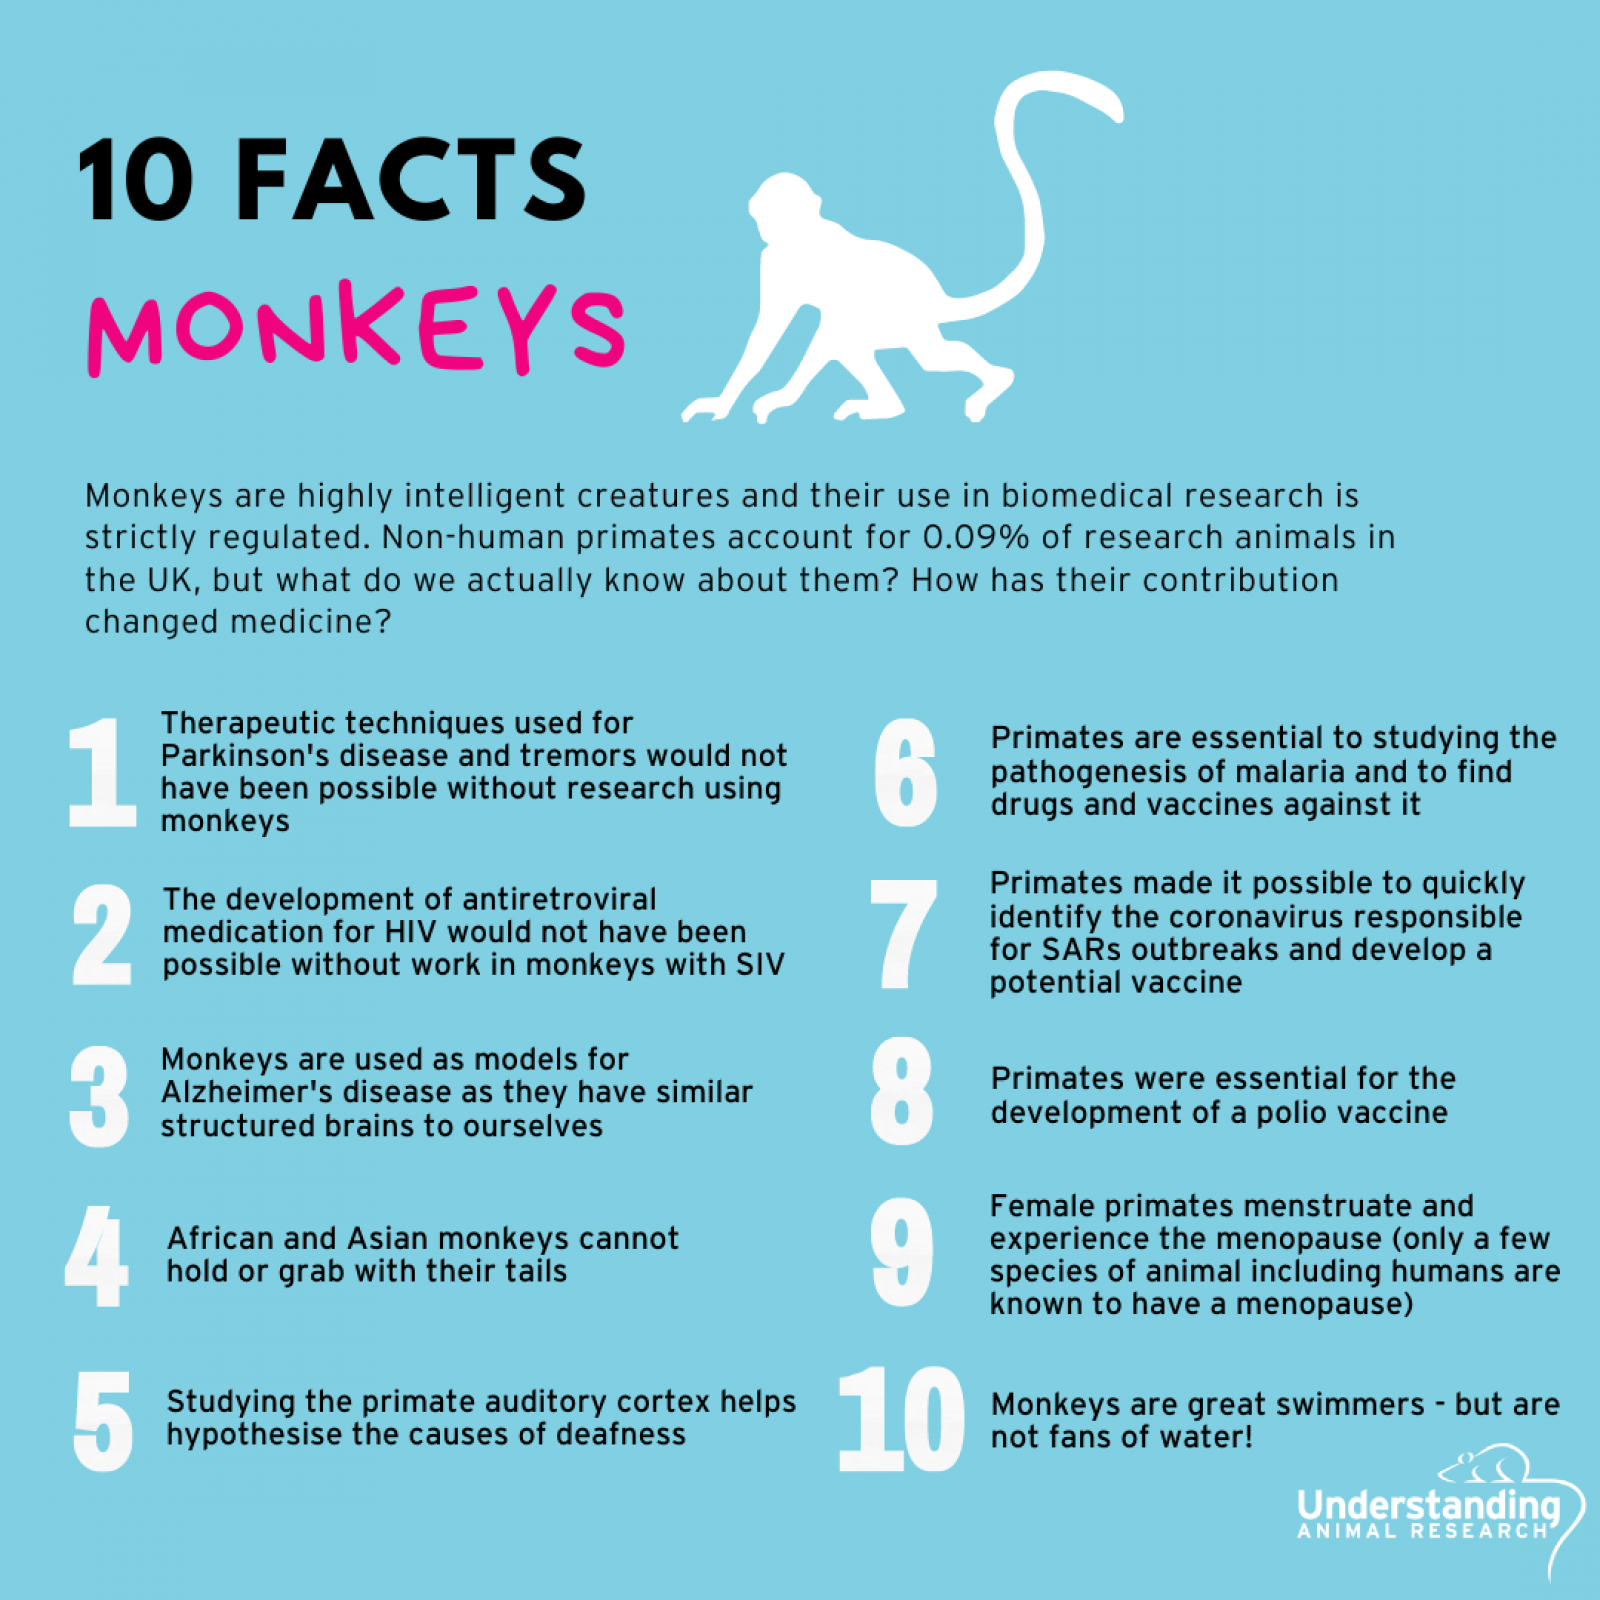 10 facts about monkeys